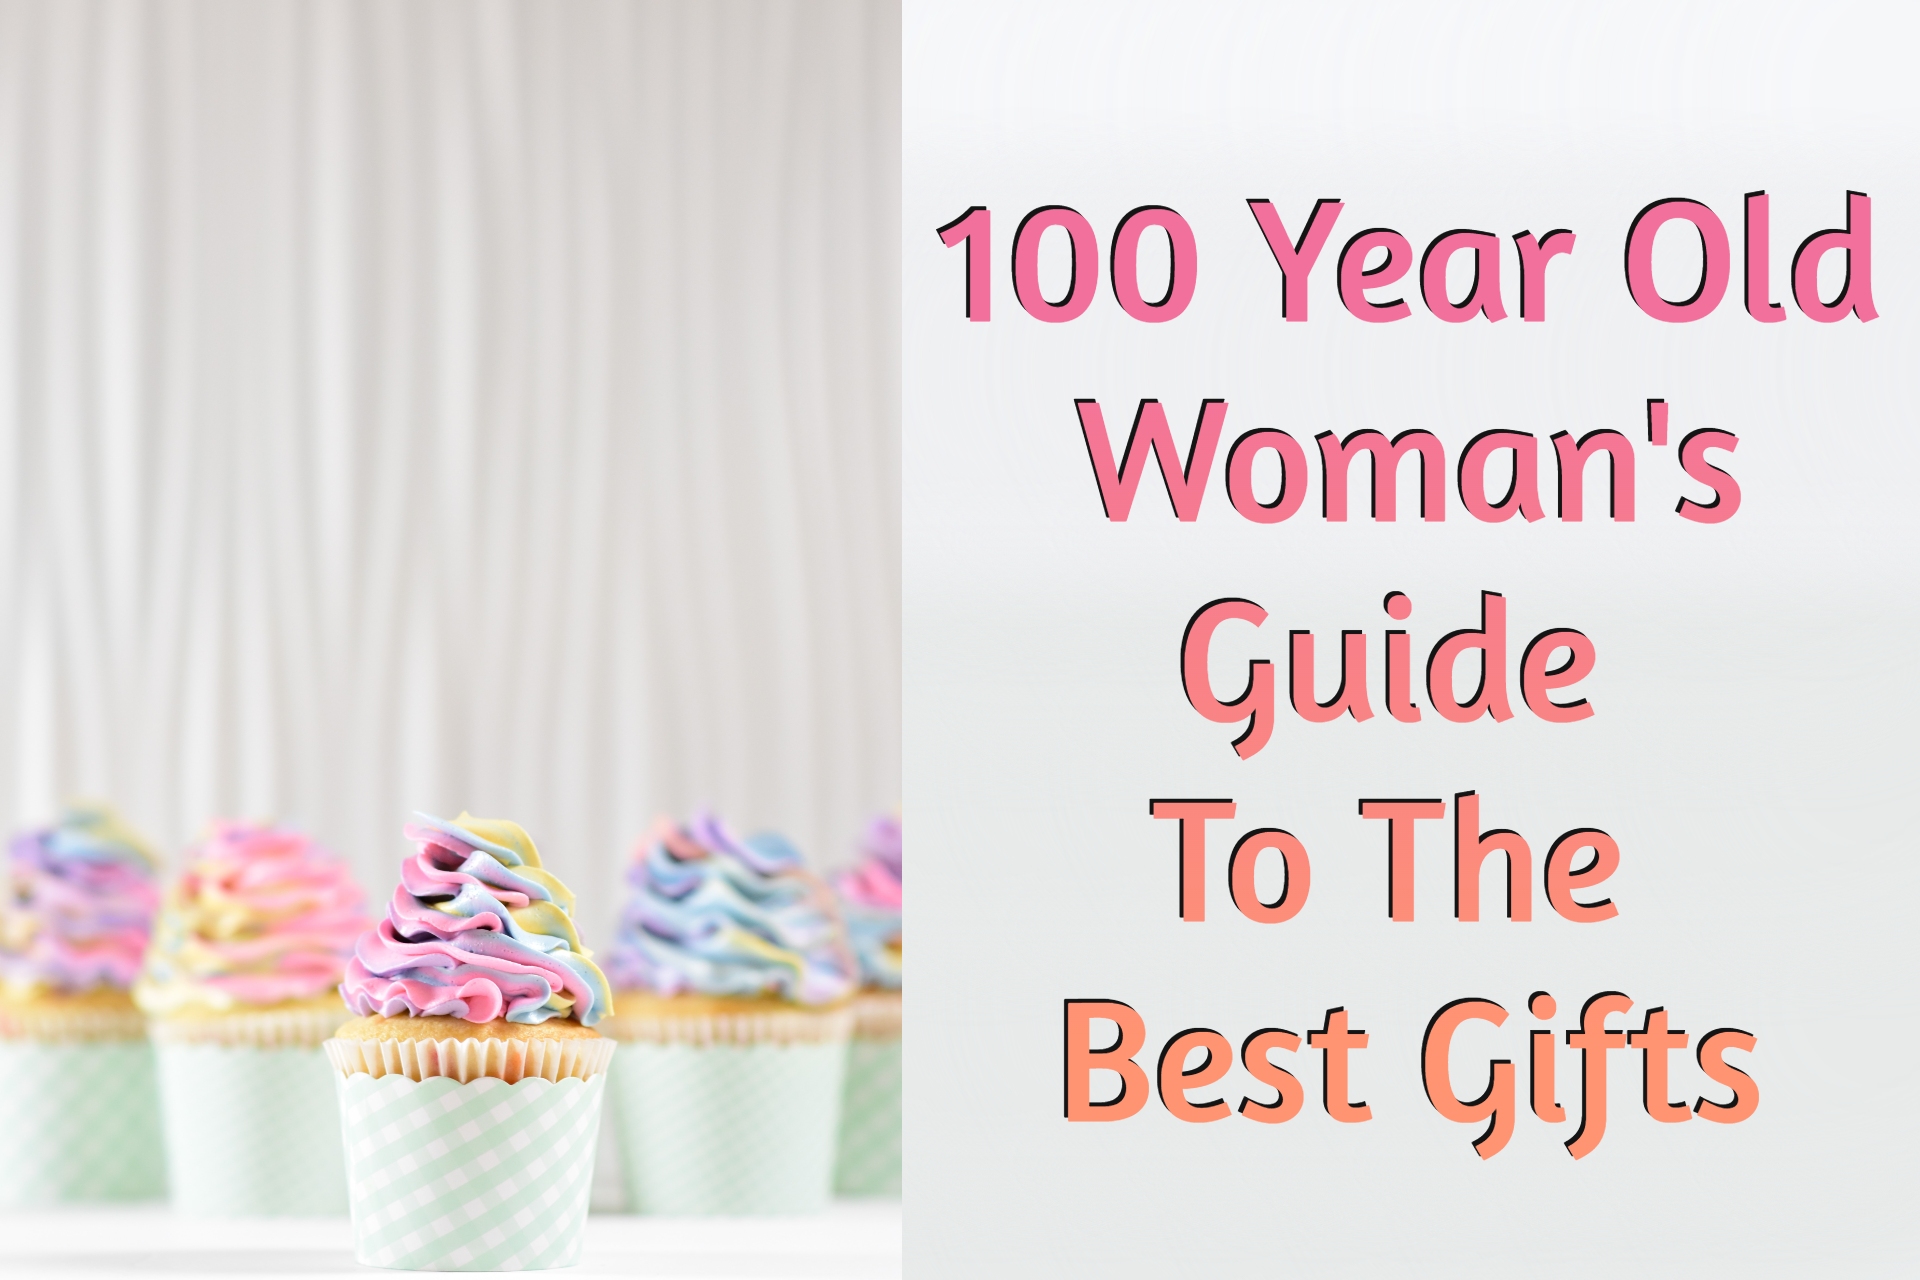 Cover image of gift ideas for 100-year-old woman by Giftsedge